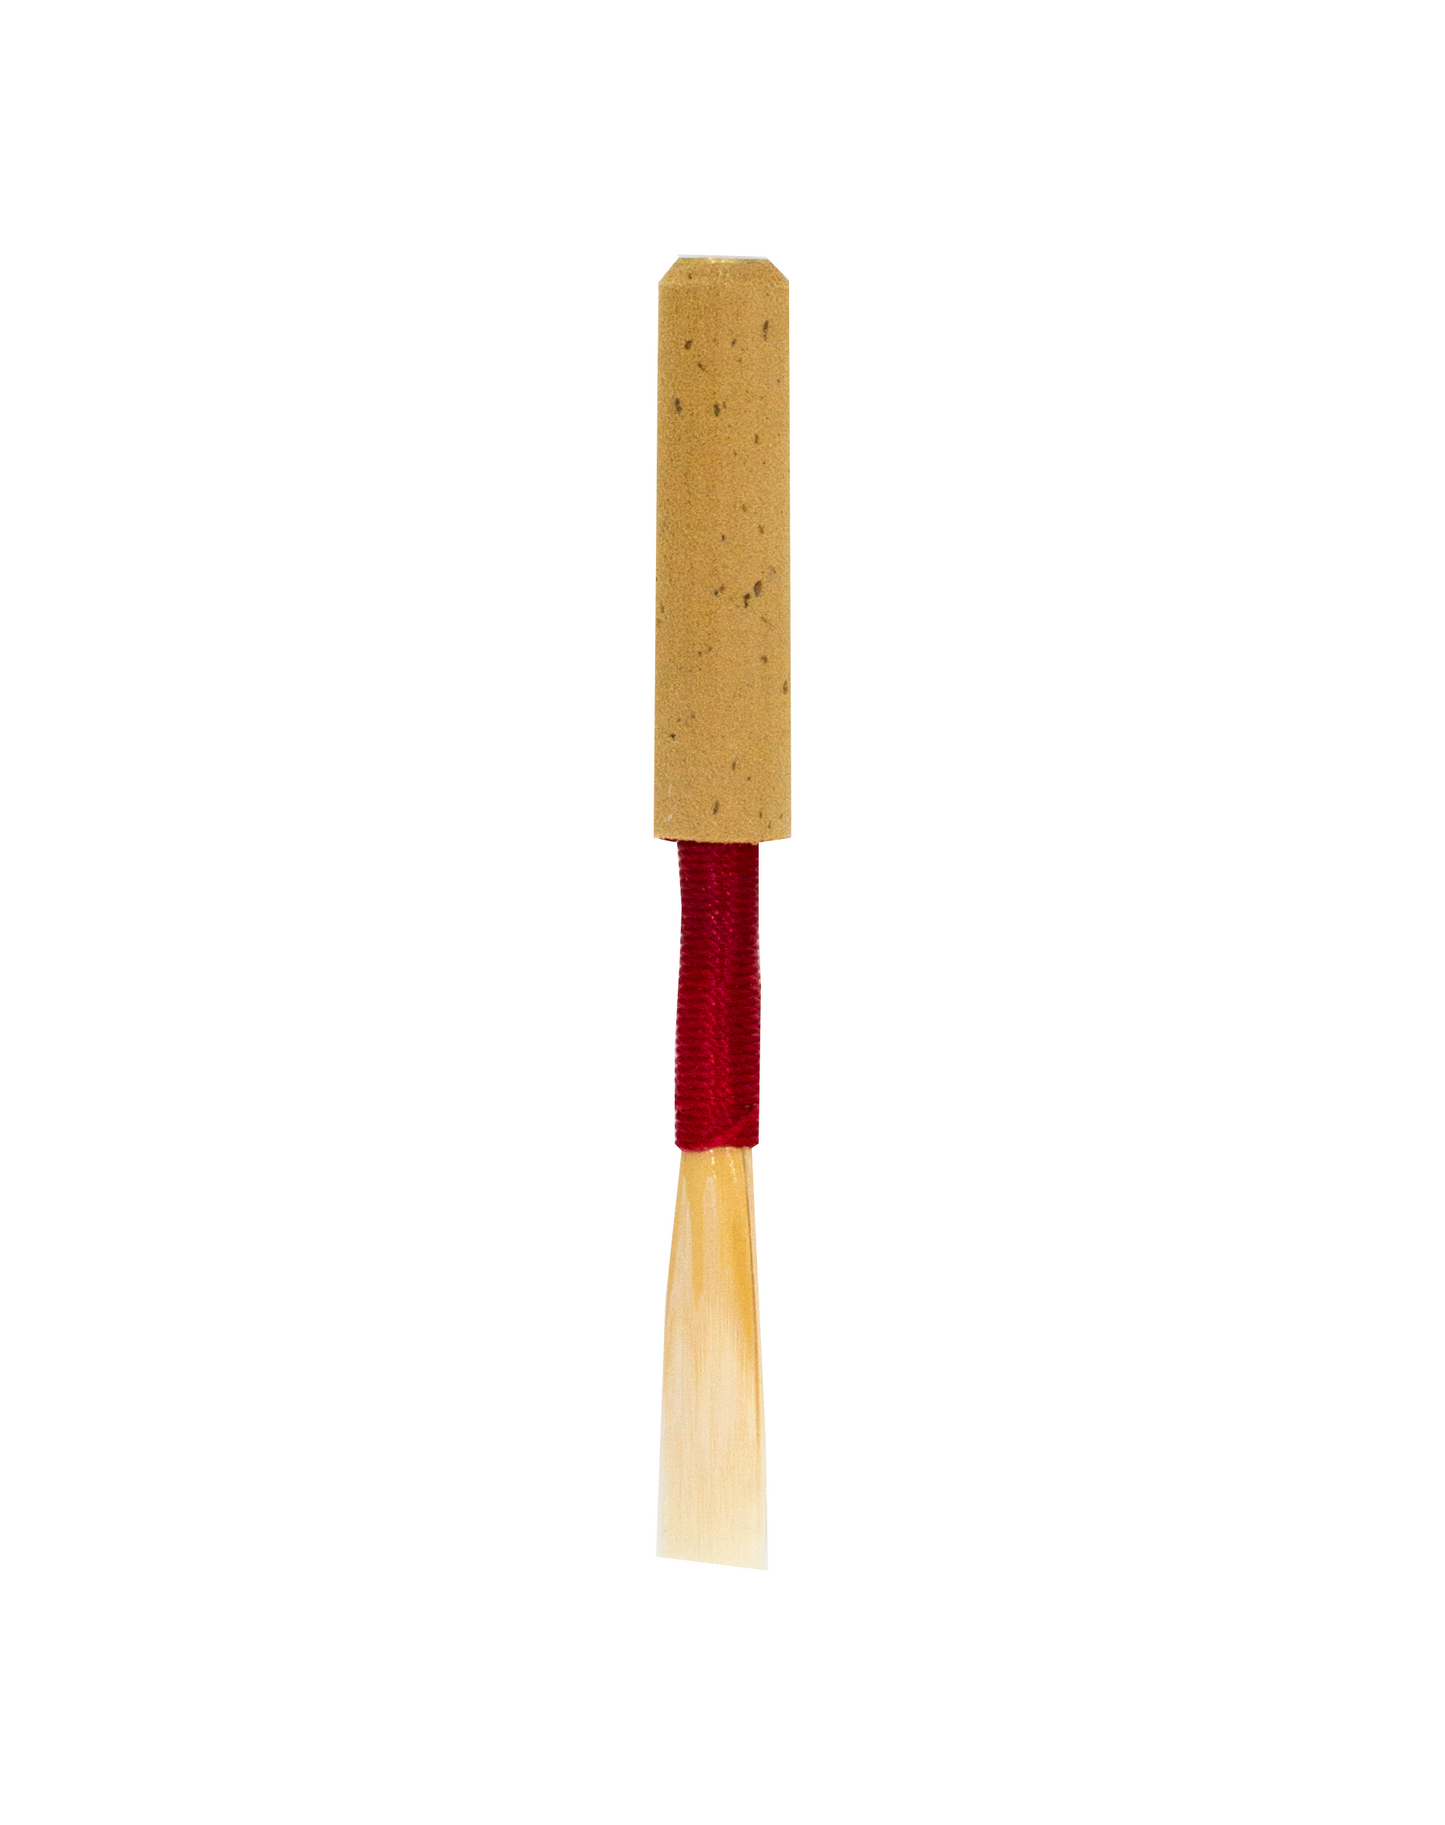 Faxx Oboe Reed, Cane